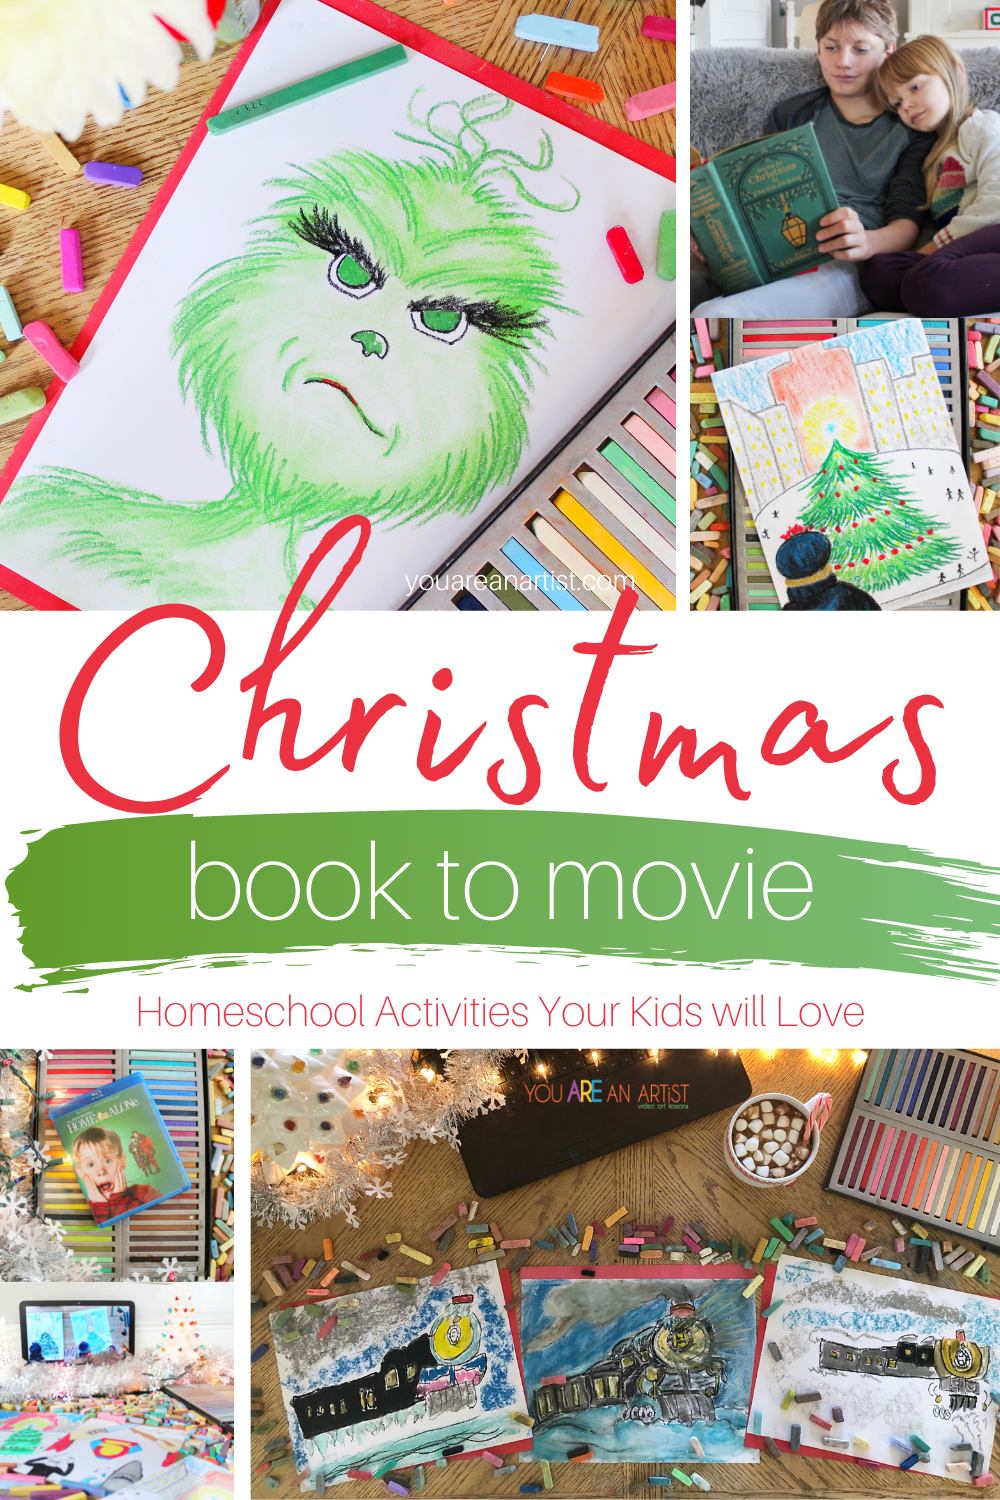 Christmas Book To Movie Homeschool Activities Your Kids Will Love: Check out this festive list of Christmas books made into movies, and now your kids can re-create them with chalk pastels! #Christmas #Christmasart #Christmaschalkpastels #Christmasbooktomovie #Christmashomeschool #chalkpastels #Christmashomeschoolactivities 